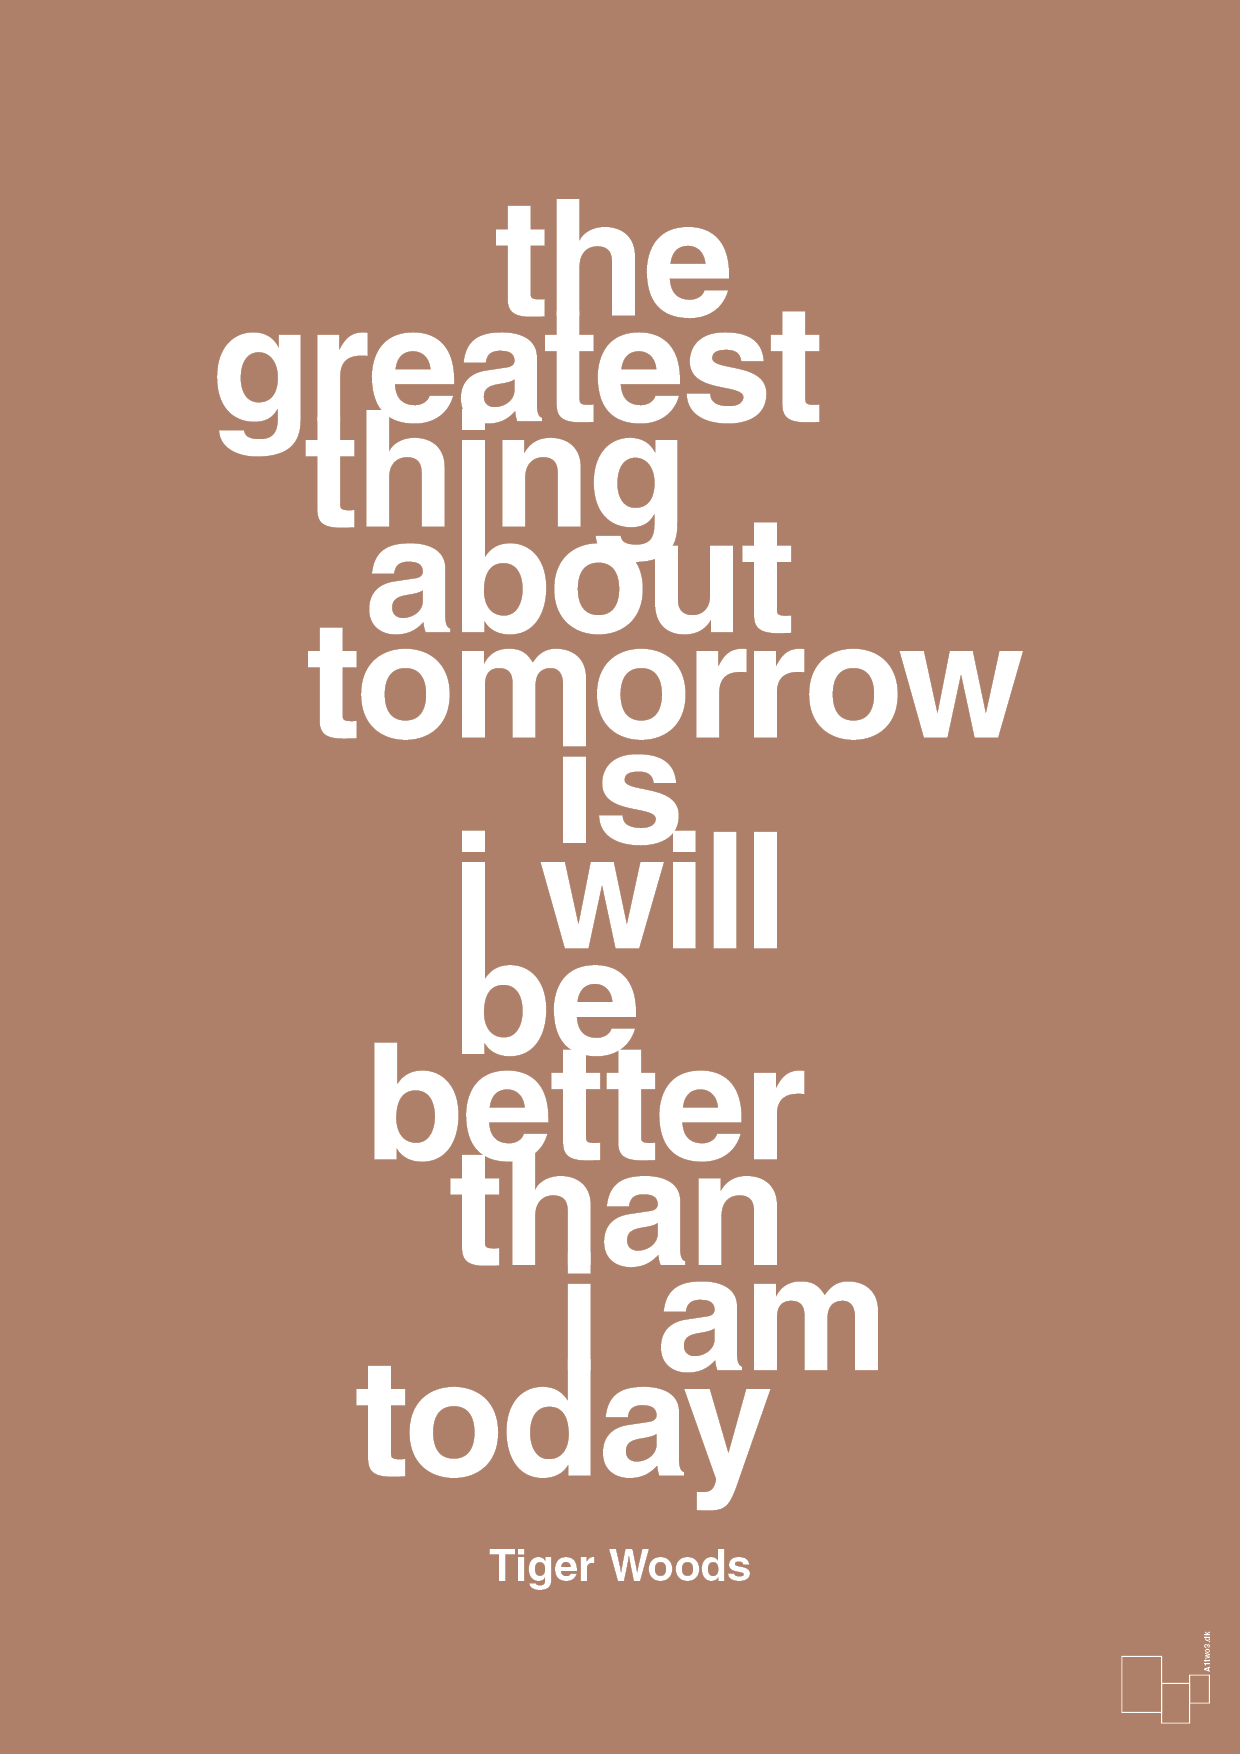 the greatest thing about tomorrow is i will be better than i am today - Plakat med Citater i Cider Spice